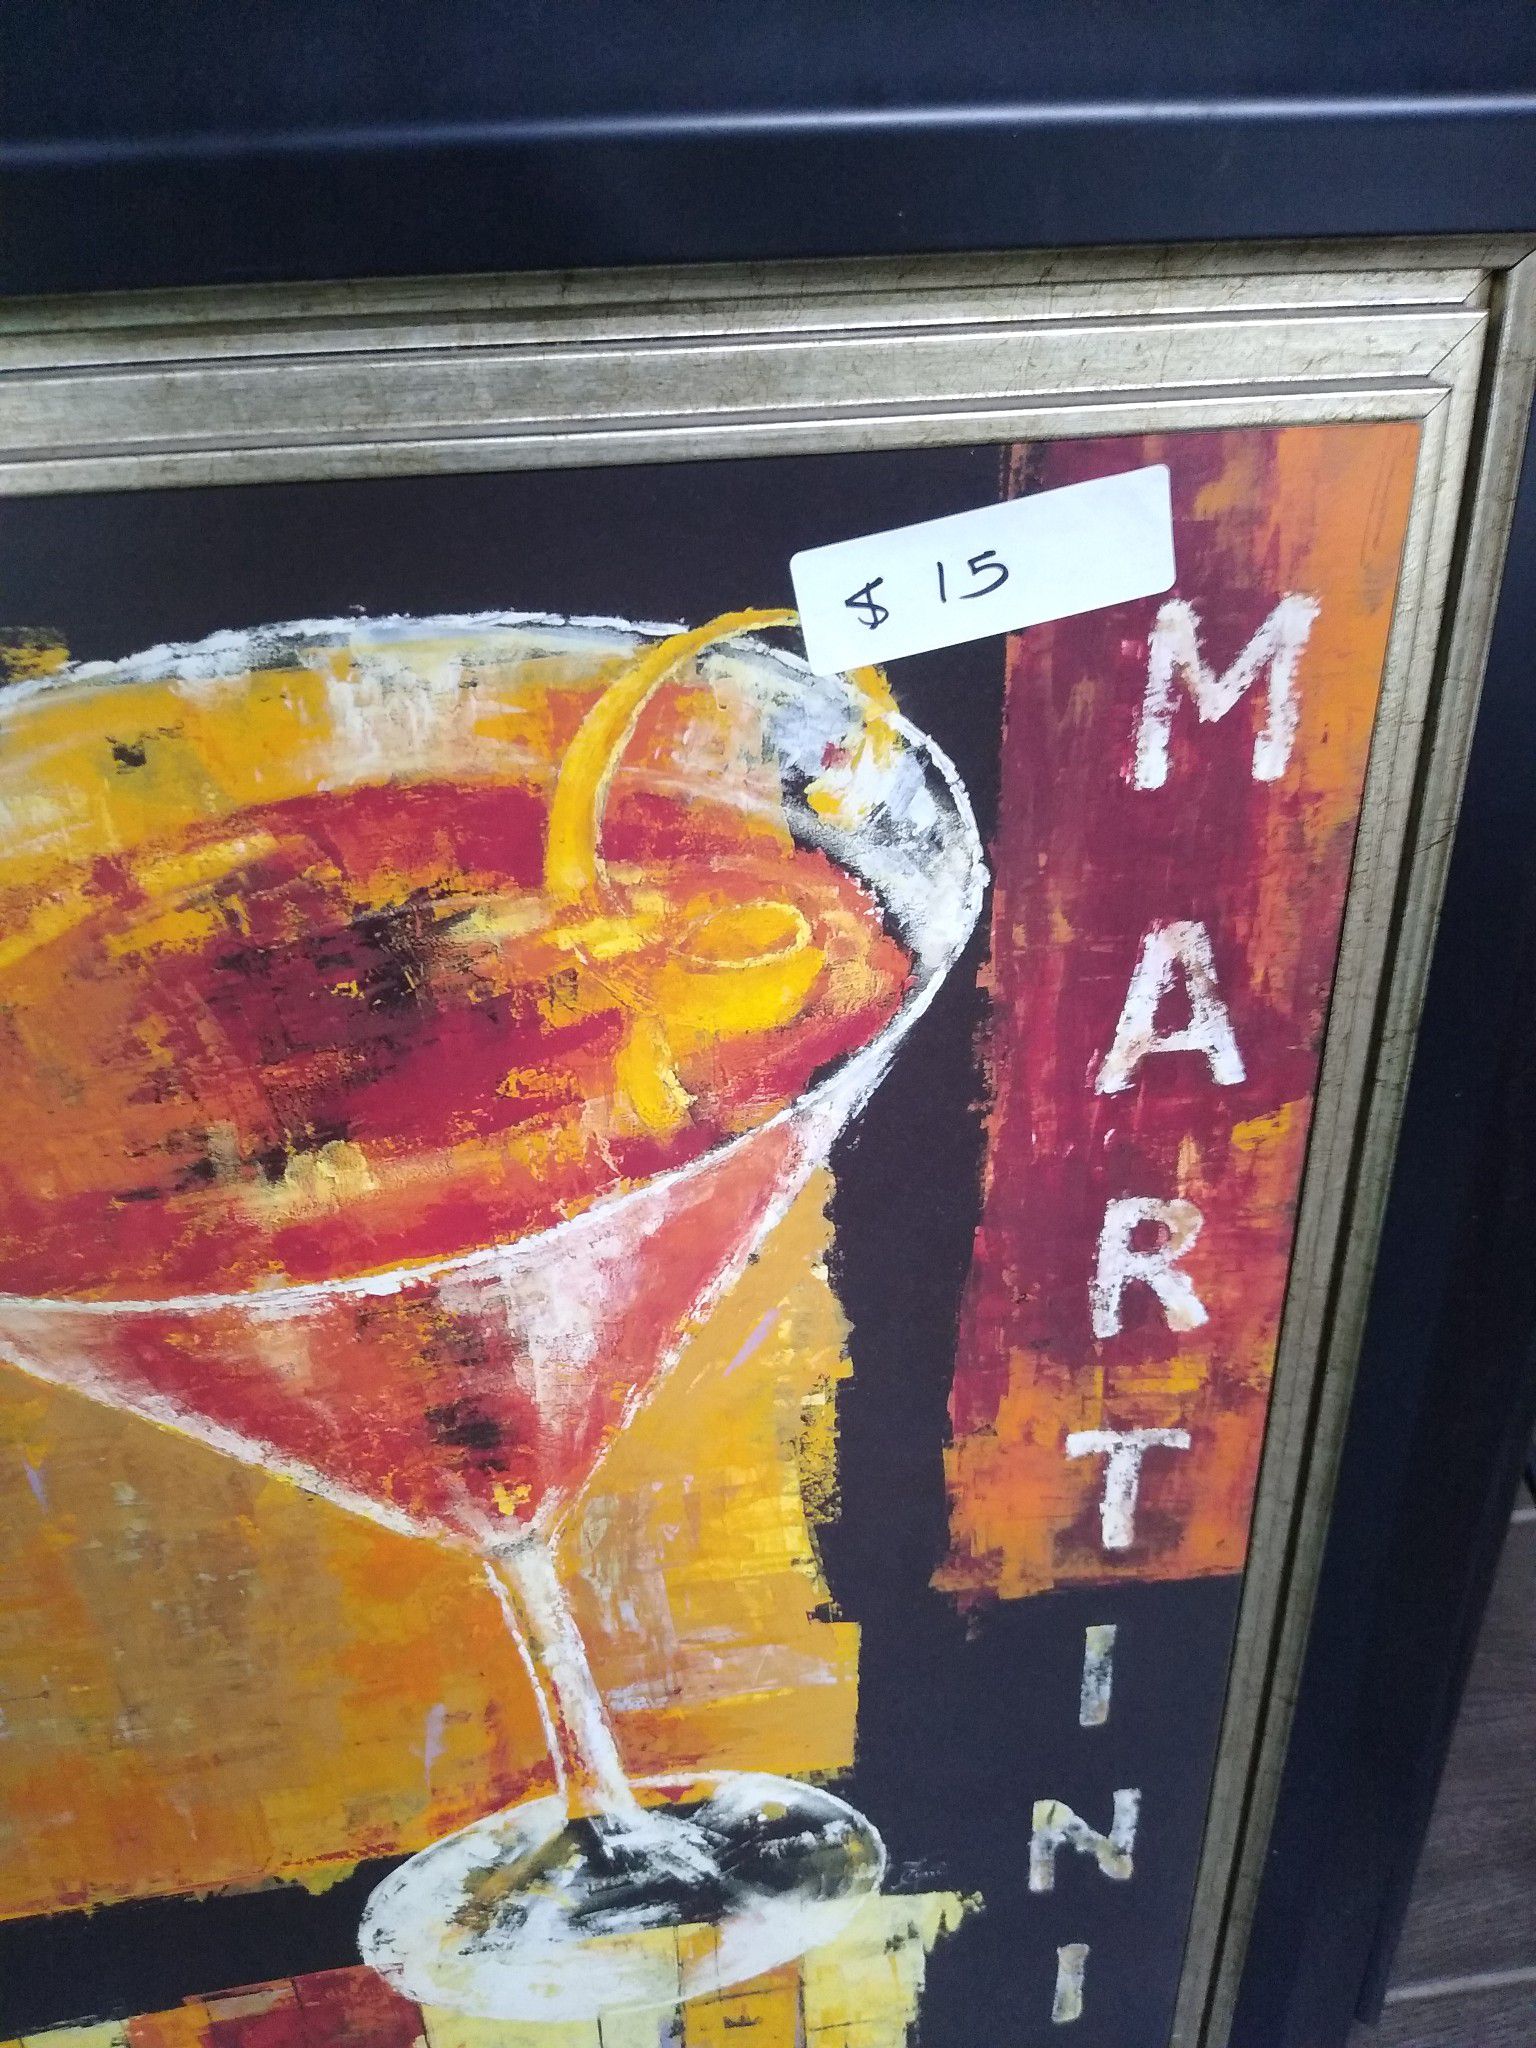 Wall art Martini glass$5 IF PICKED UP BY 6PM TONIGHT